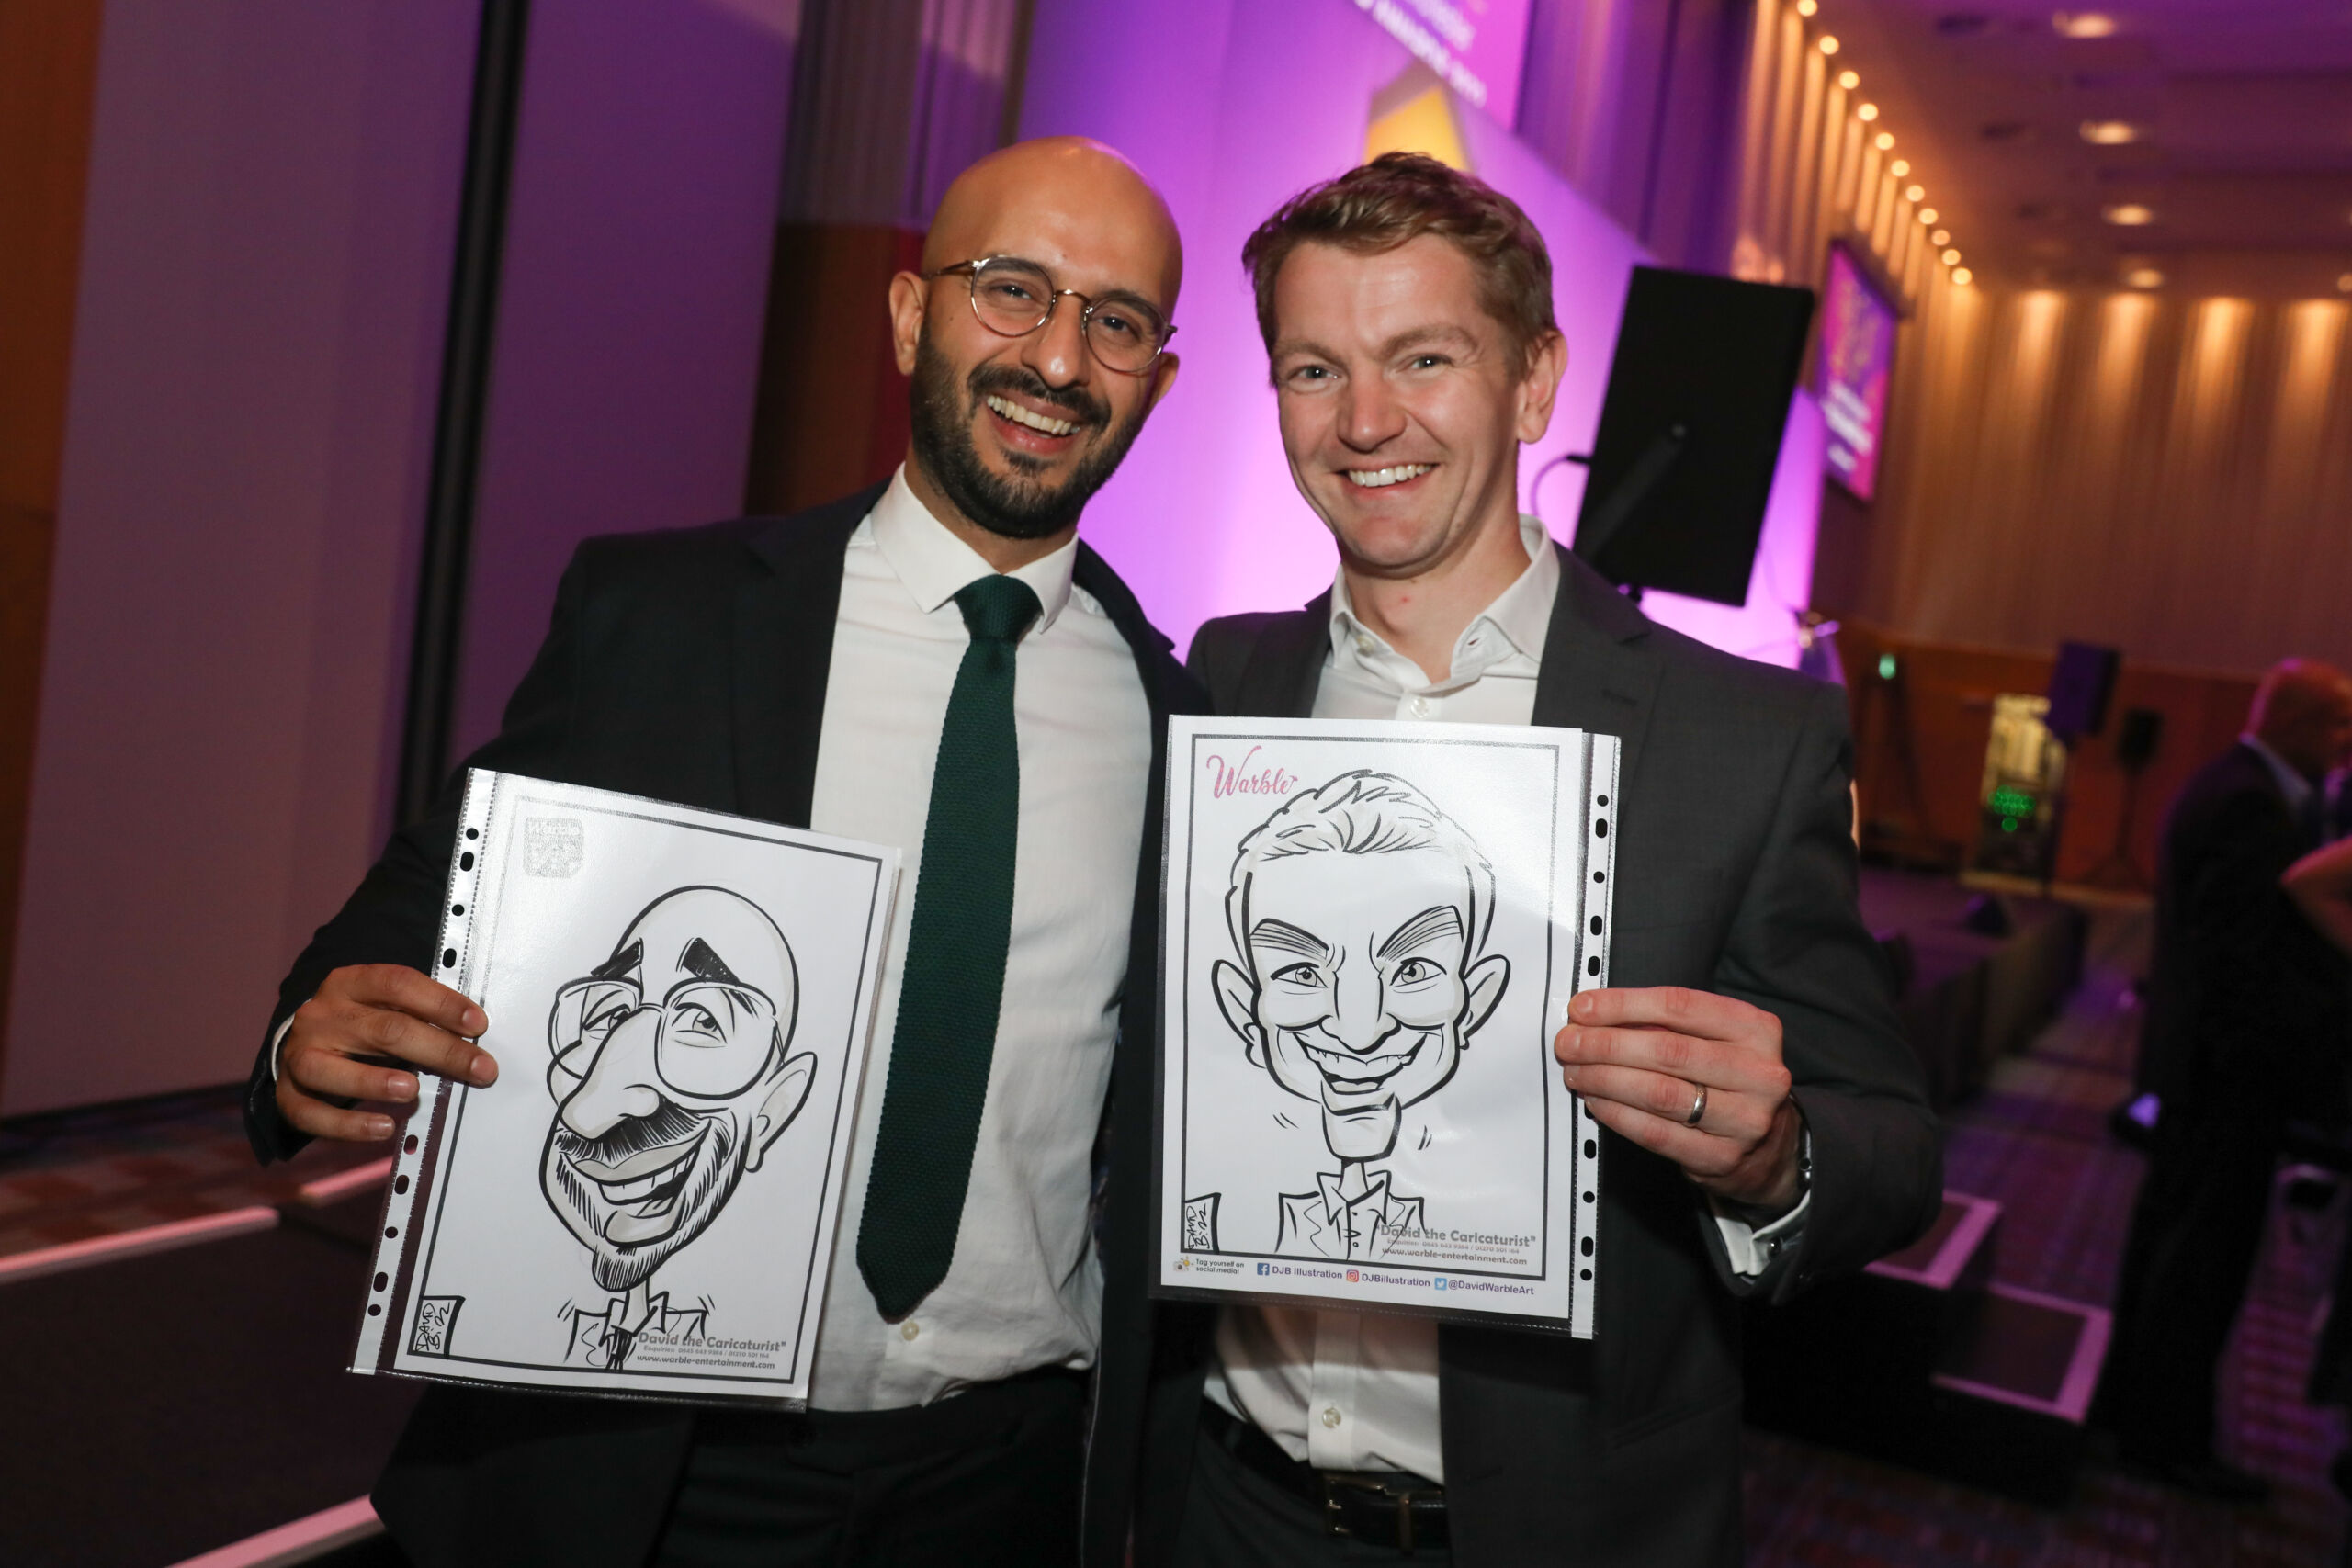 Two men in dark suits smile and hold caricatures of themselves